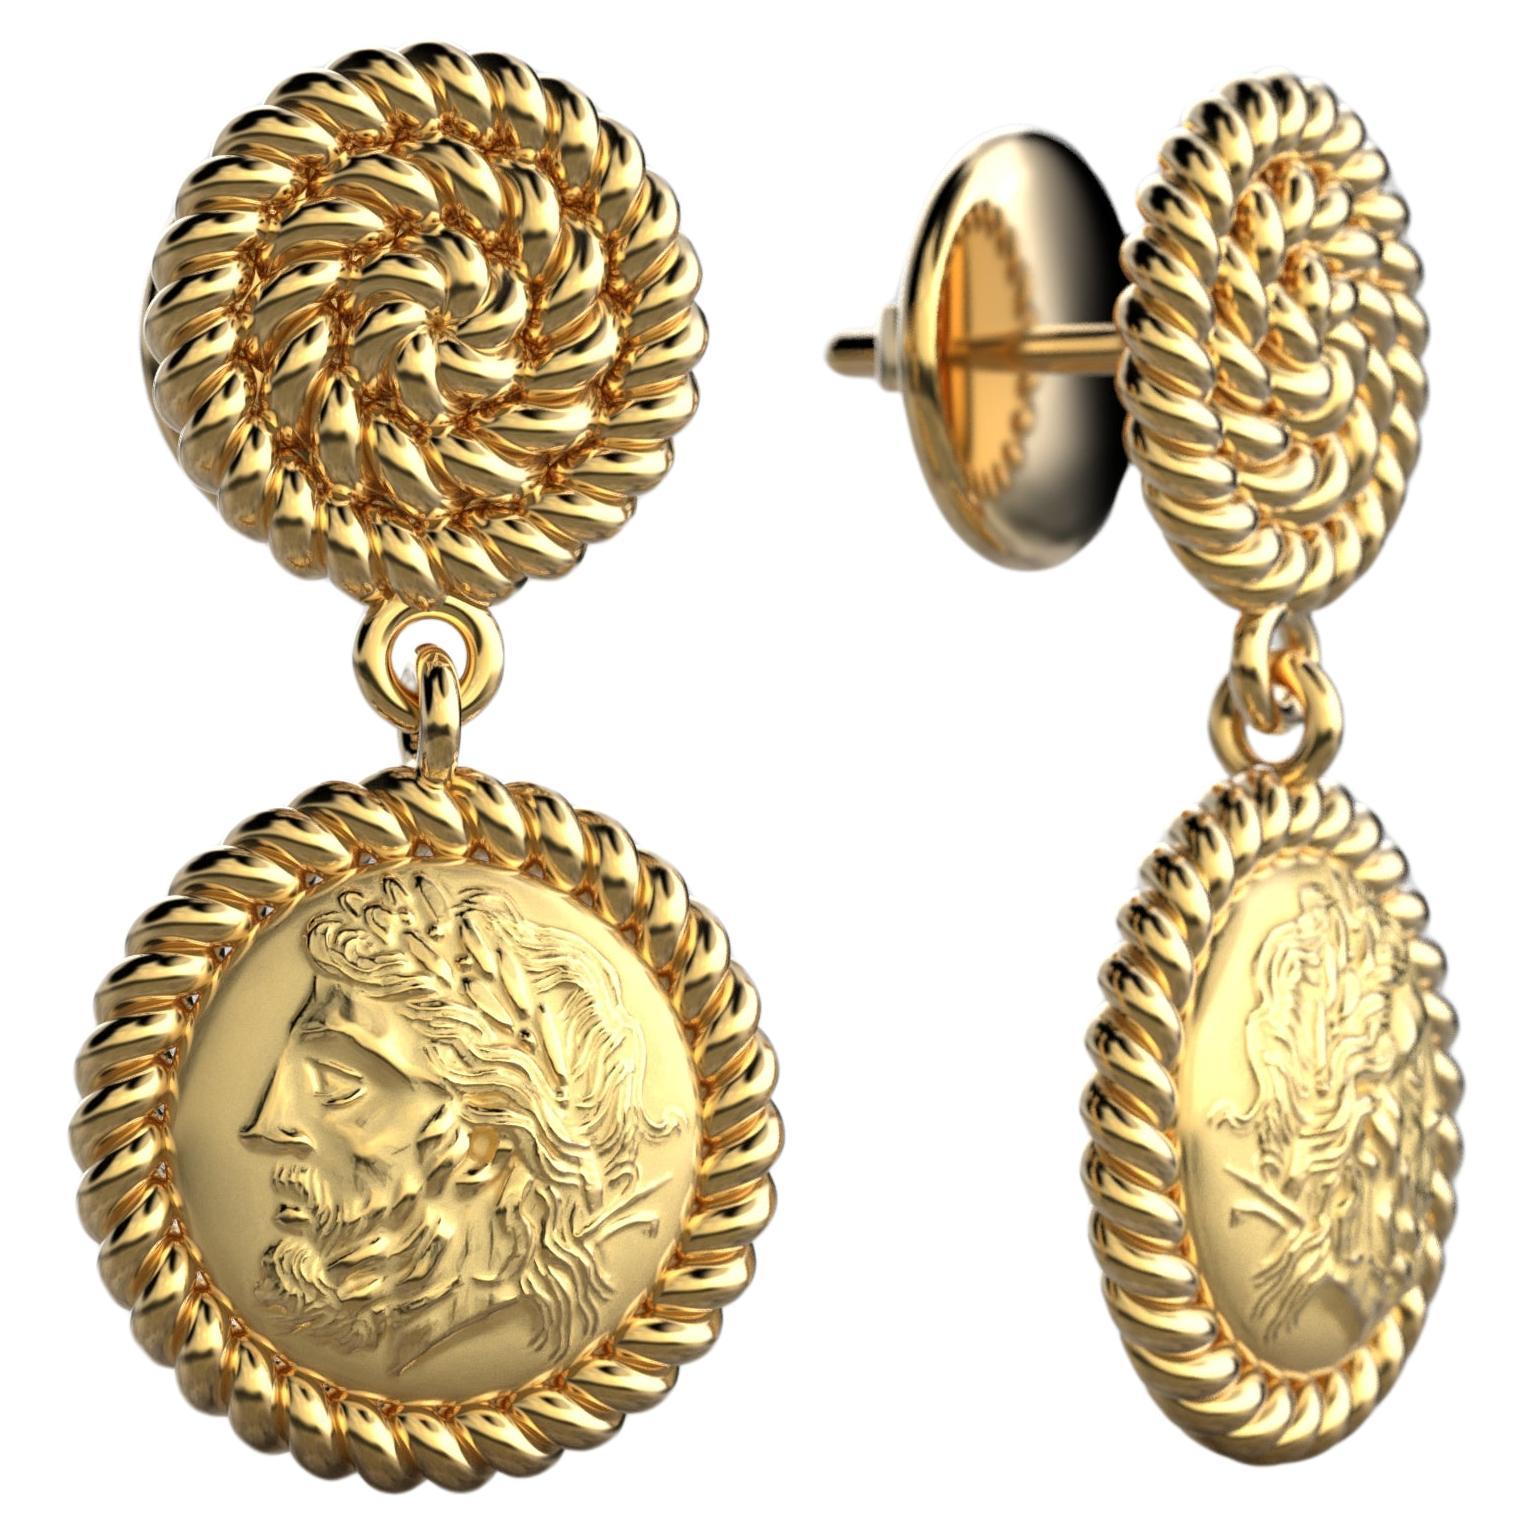 Made to order in 18k Gold. Yellow gold, rose gold or white gold.
Adorn yourself with Italian perfection — Dangle Earrings in 14k or 18k solid gold, inspired by Ancient Greek style. Crafted in Italy, these exquisite Zeus Coin Earrings fuse history